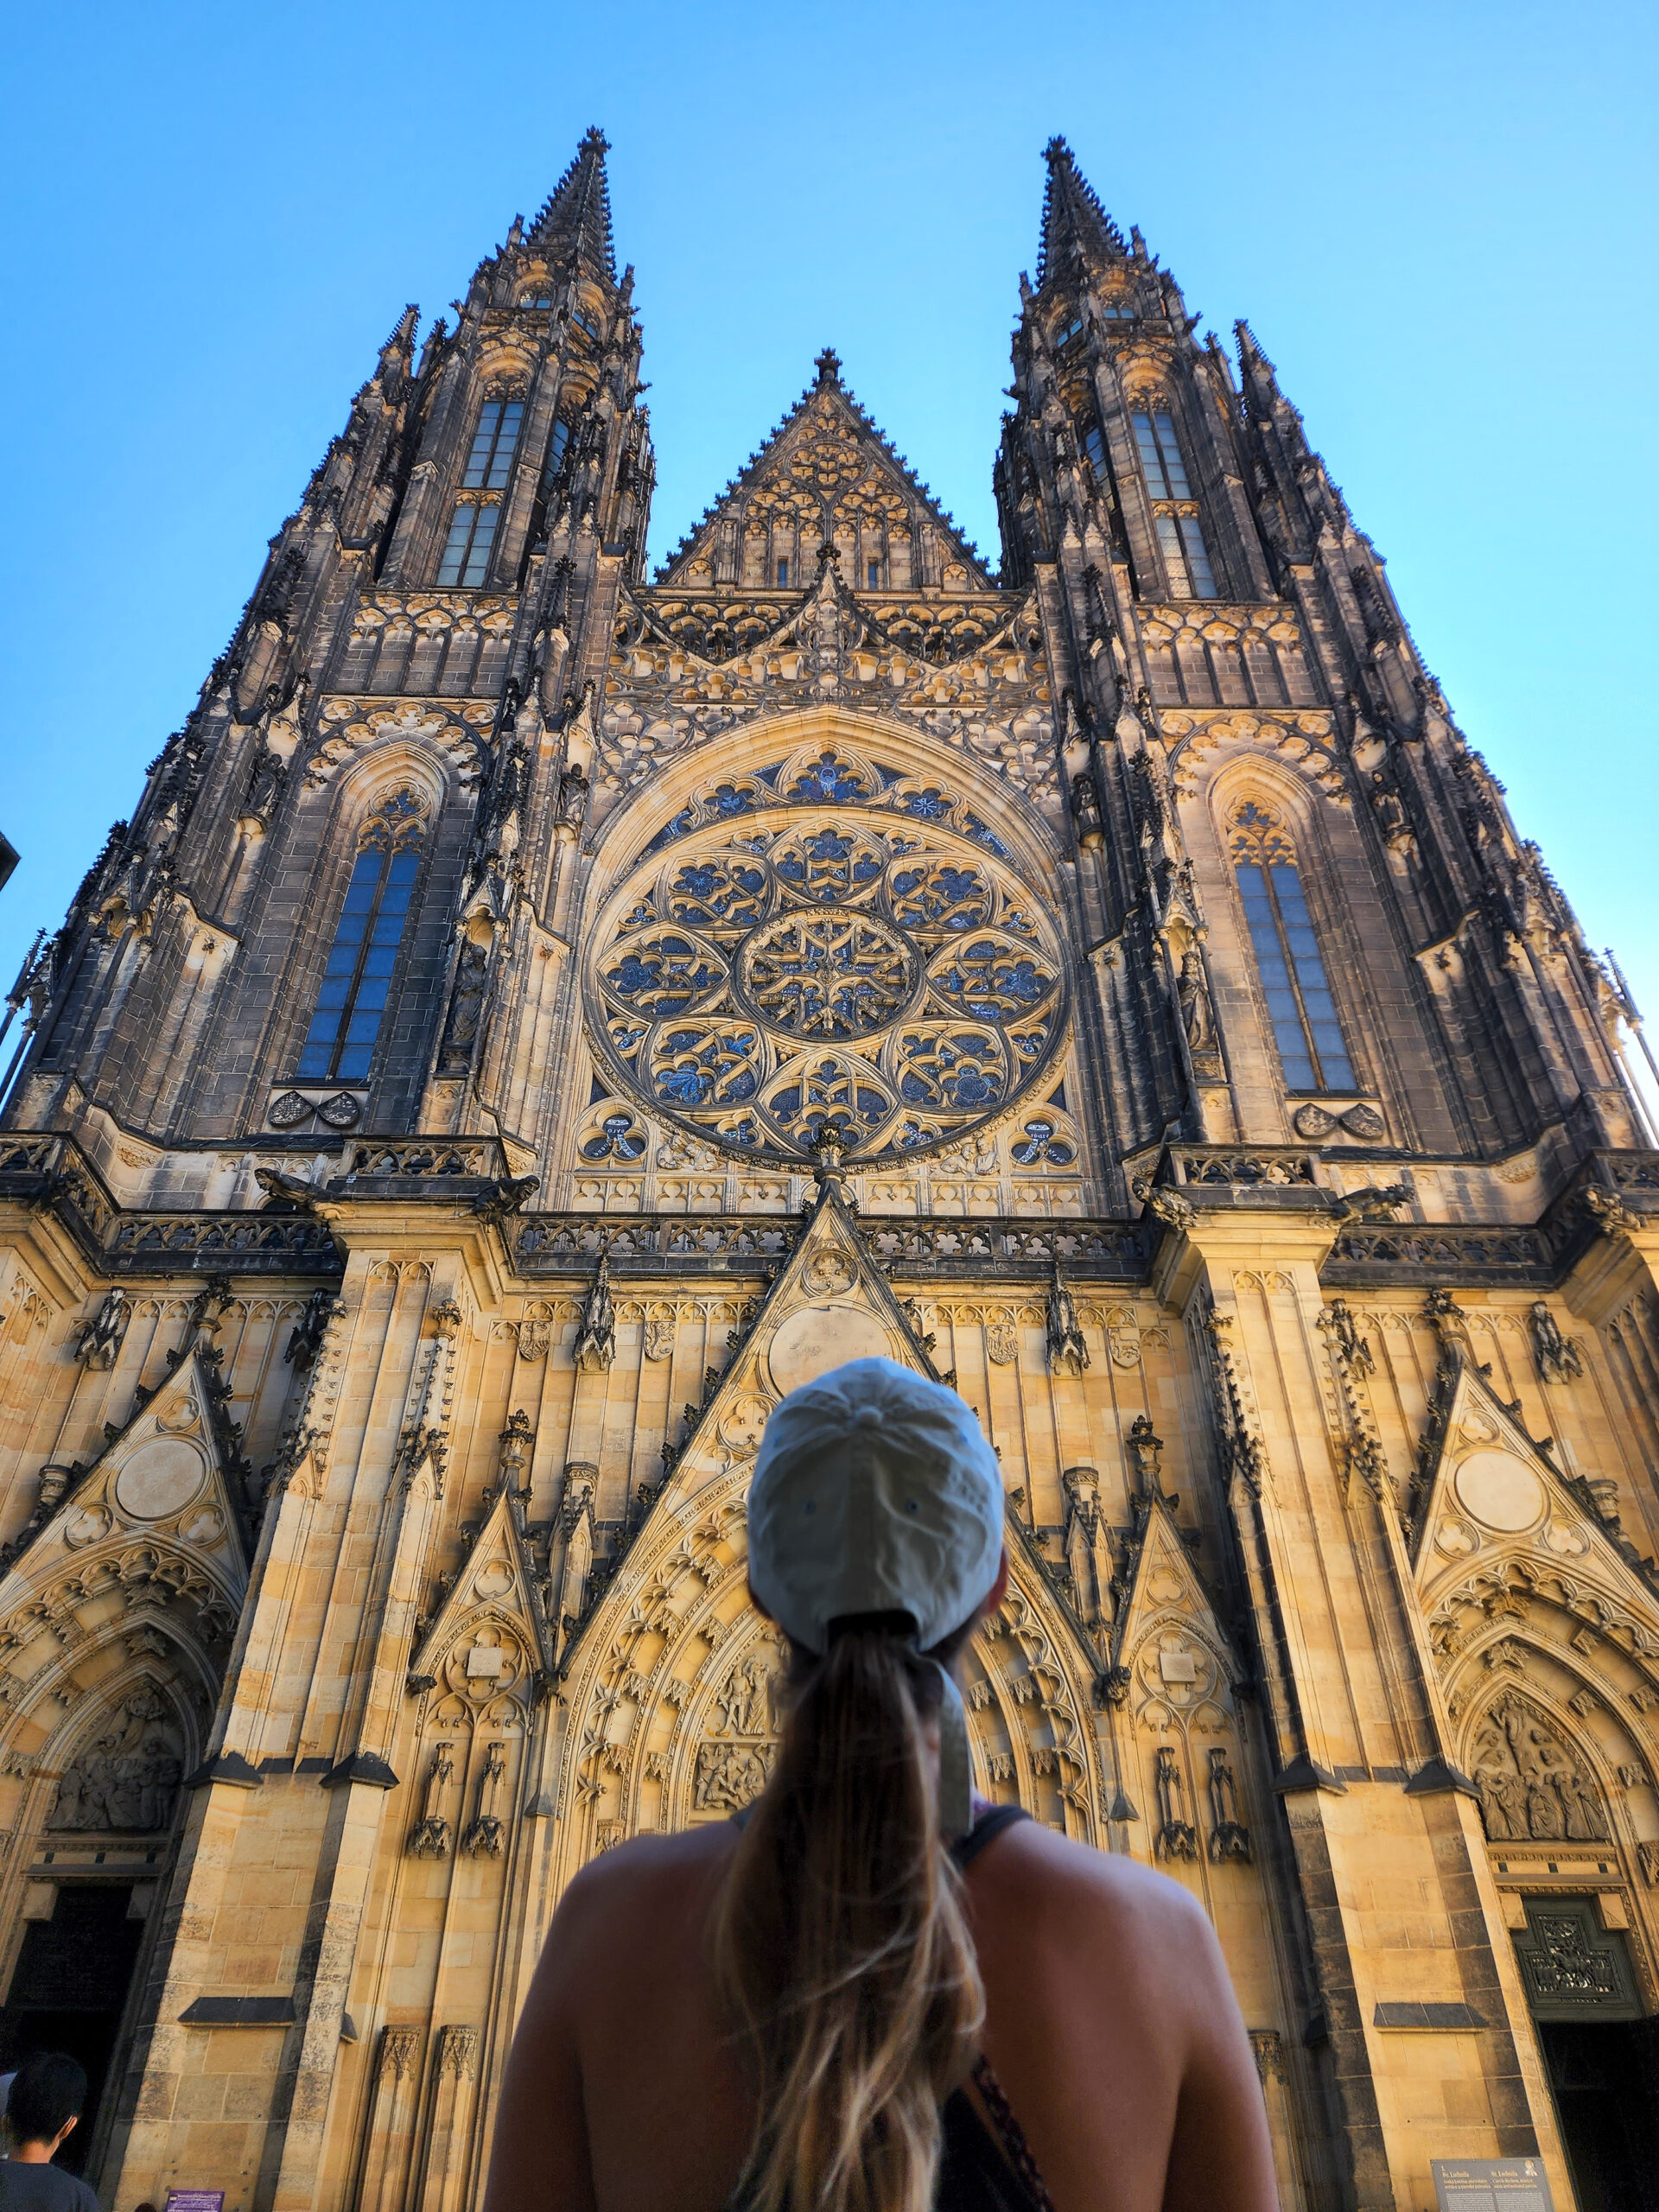 Prague Castle and St. Vitus Cathedral: